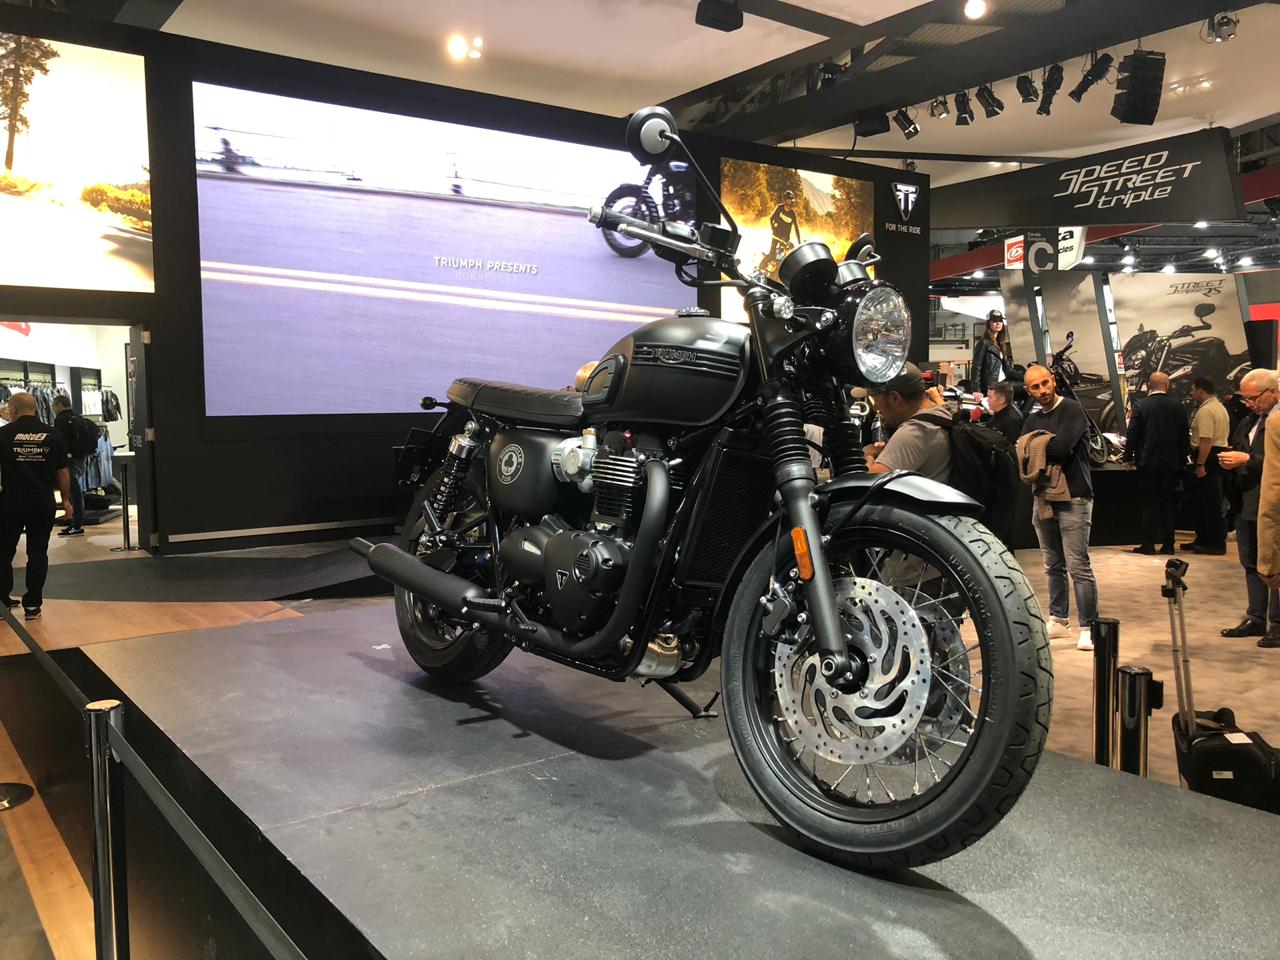 <p>Triumph has revealed the Bonneville&nbsp;T120 Diamond and Ace editions at the EICMA 2018. These are a special version which commemorate&nbsp;60 years of Bonneville motorcycles. It is limited to 900 units worldwide. These only get cosmetic updates and<a href="http://overdrive.in/reviews/triumph-bonneville-t120-road-test-review/"> are mechanically unchanged from the standard Bonneville T120.&nbsp;</a></p>